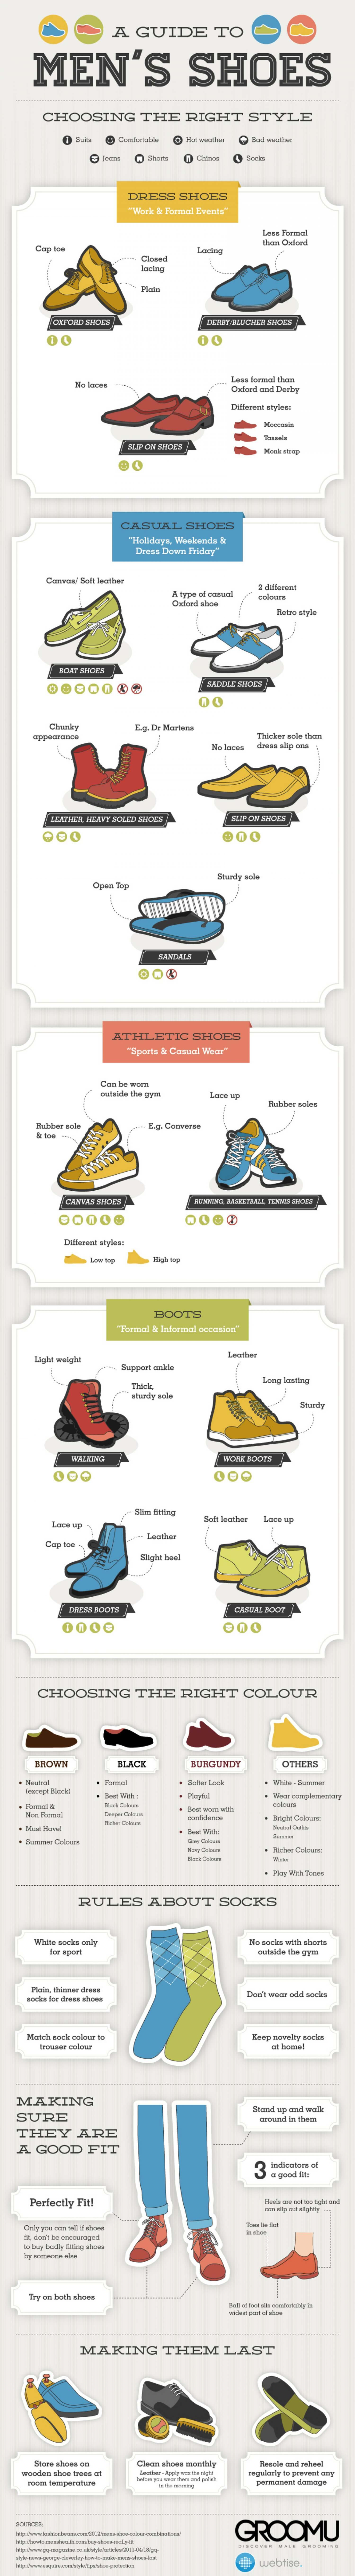 An Infographic guide to Men’s shoes